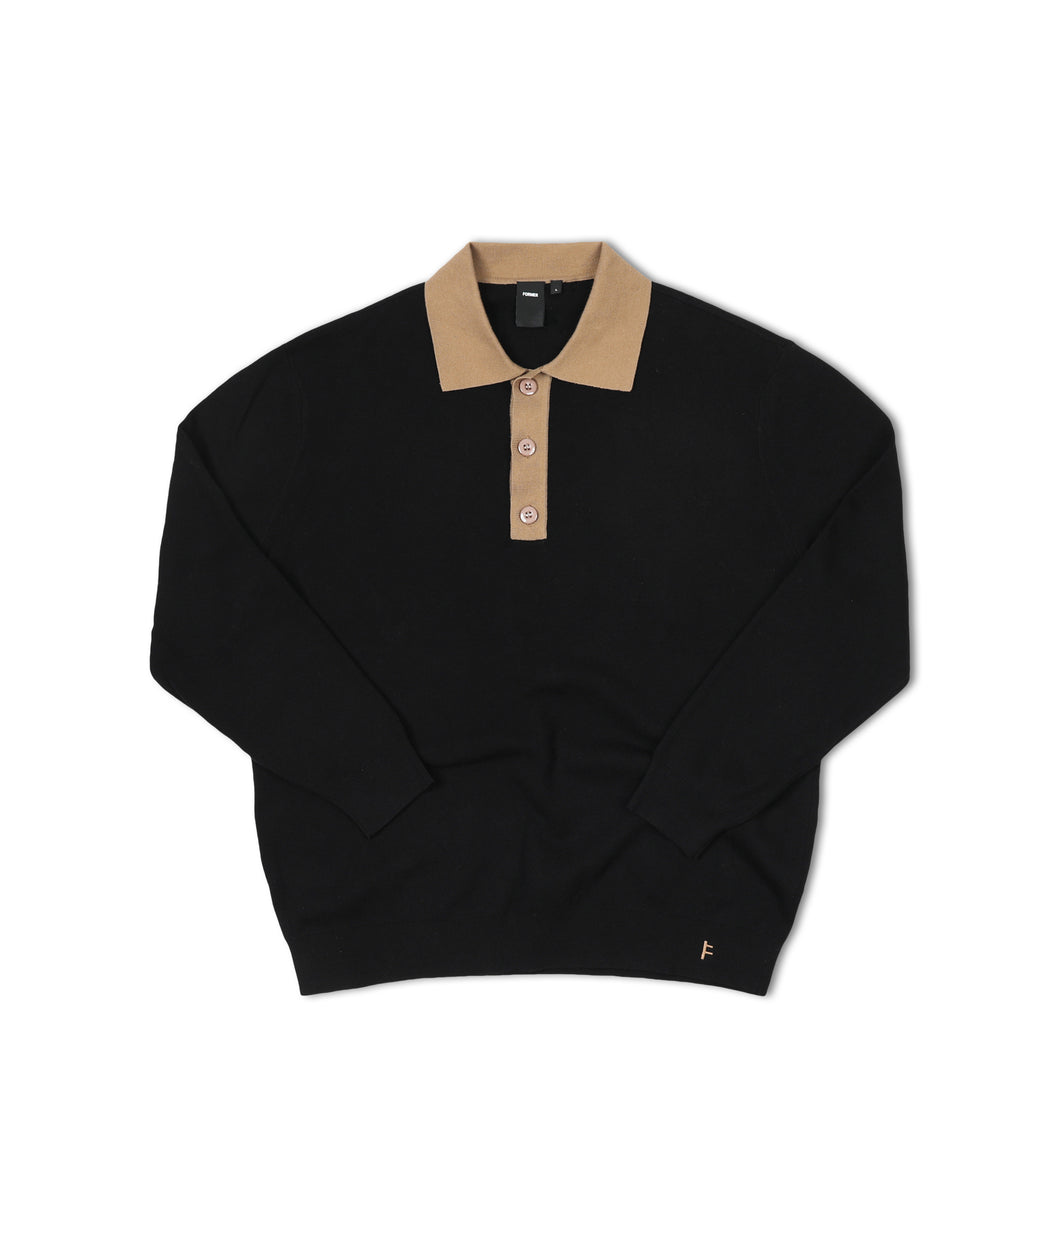 Former - Expansion Knit Polo in Black/Bronze